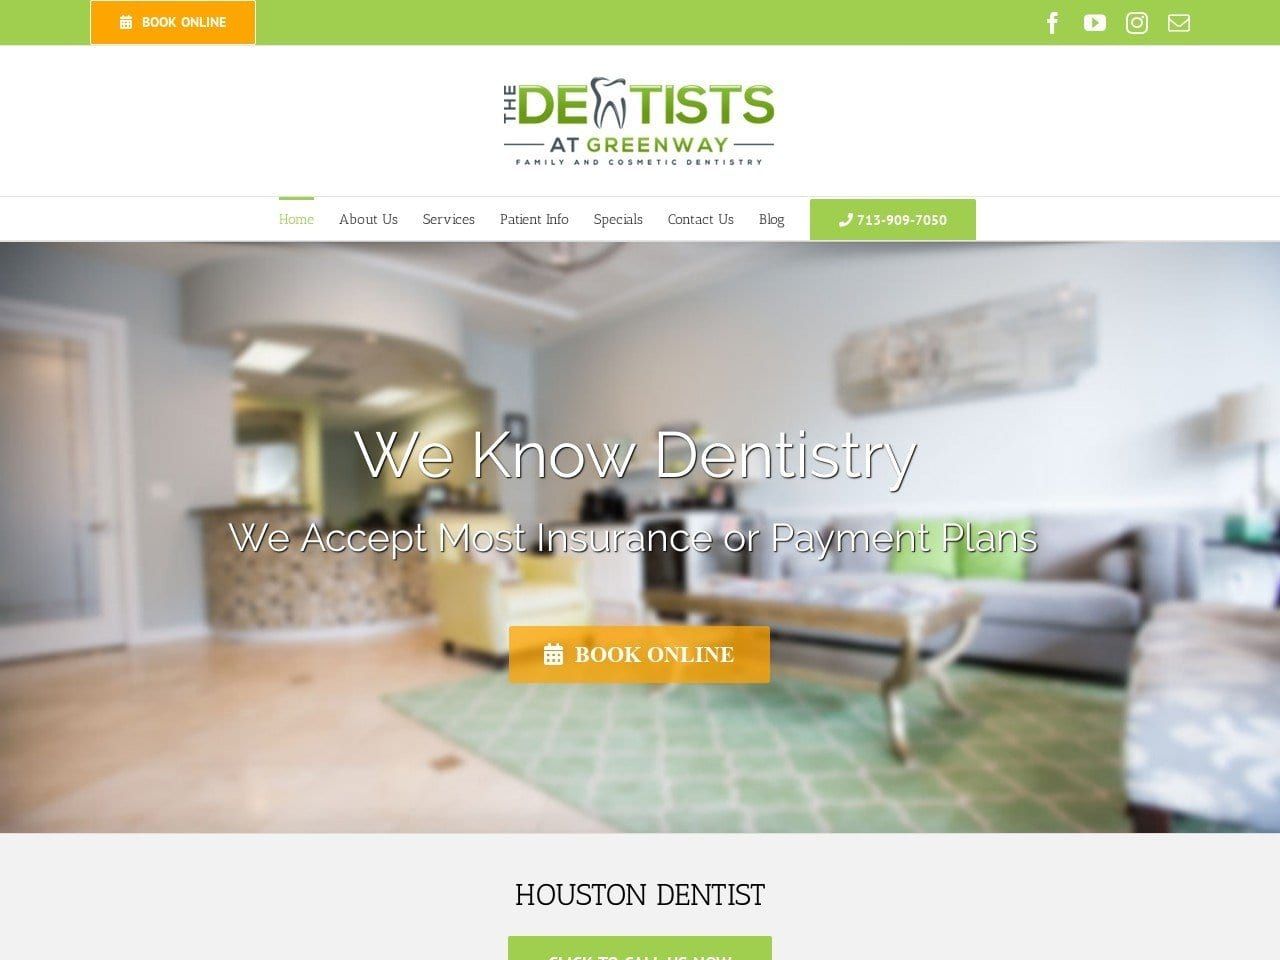 The Dentist Website Screenshot from thedentistsatgreenway.com